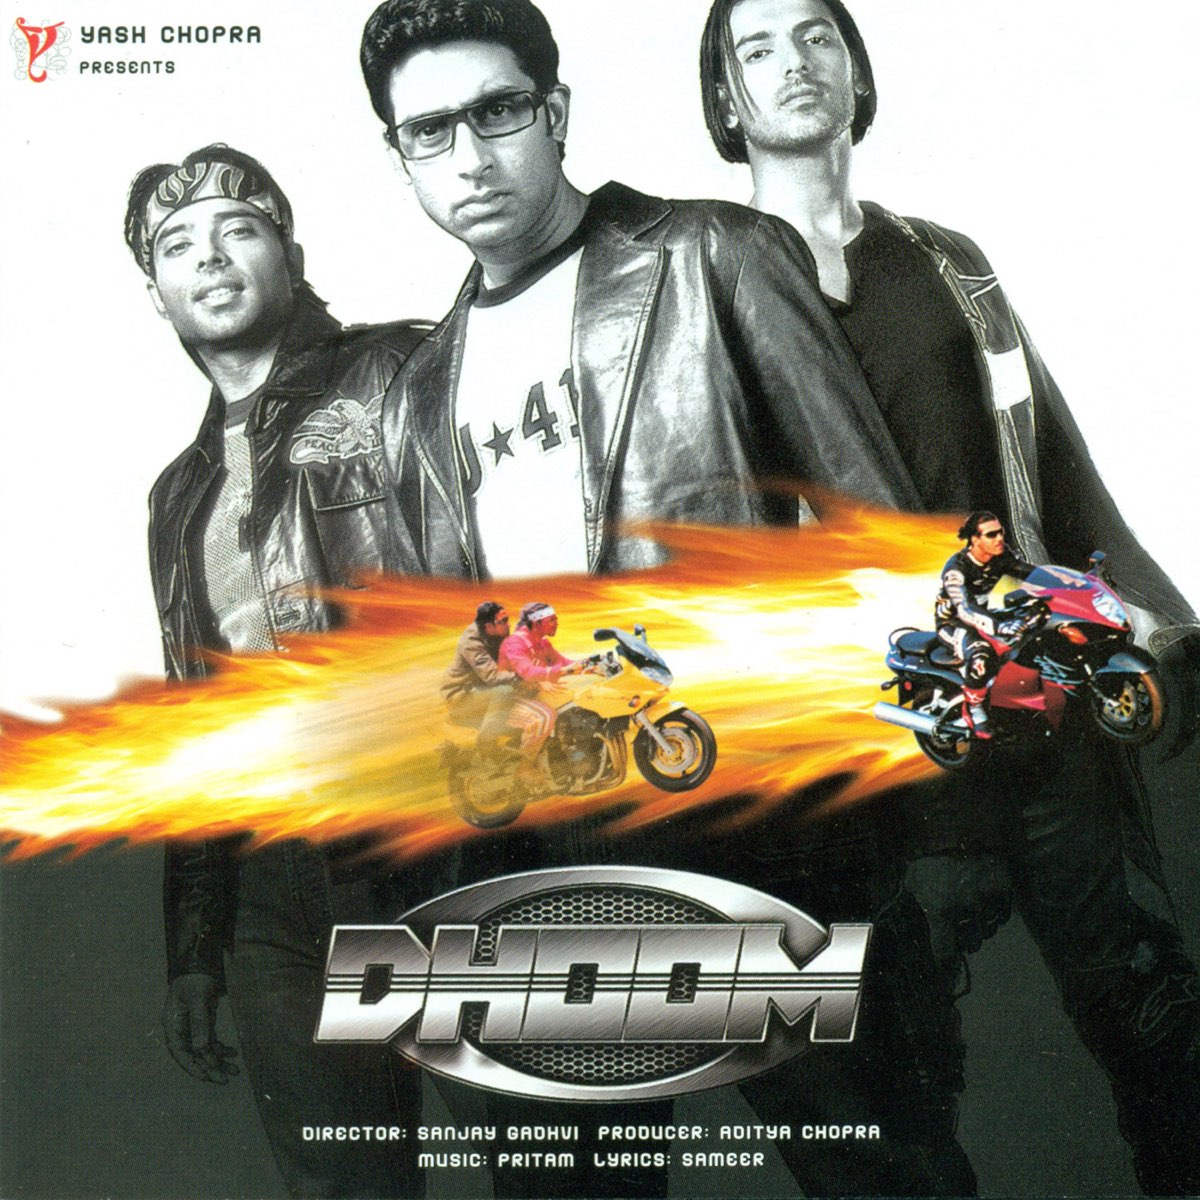 Dhoom (Original Motion Picture Soundtrack) by Pritam on Apple Music